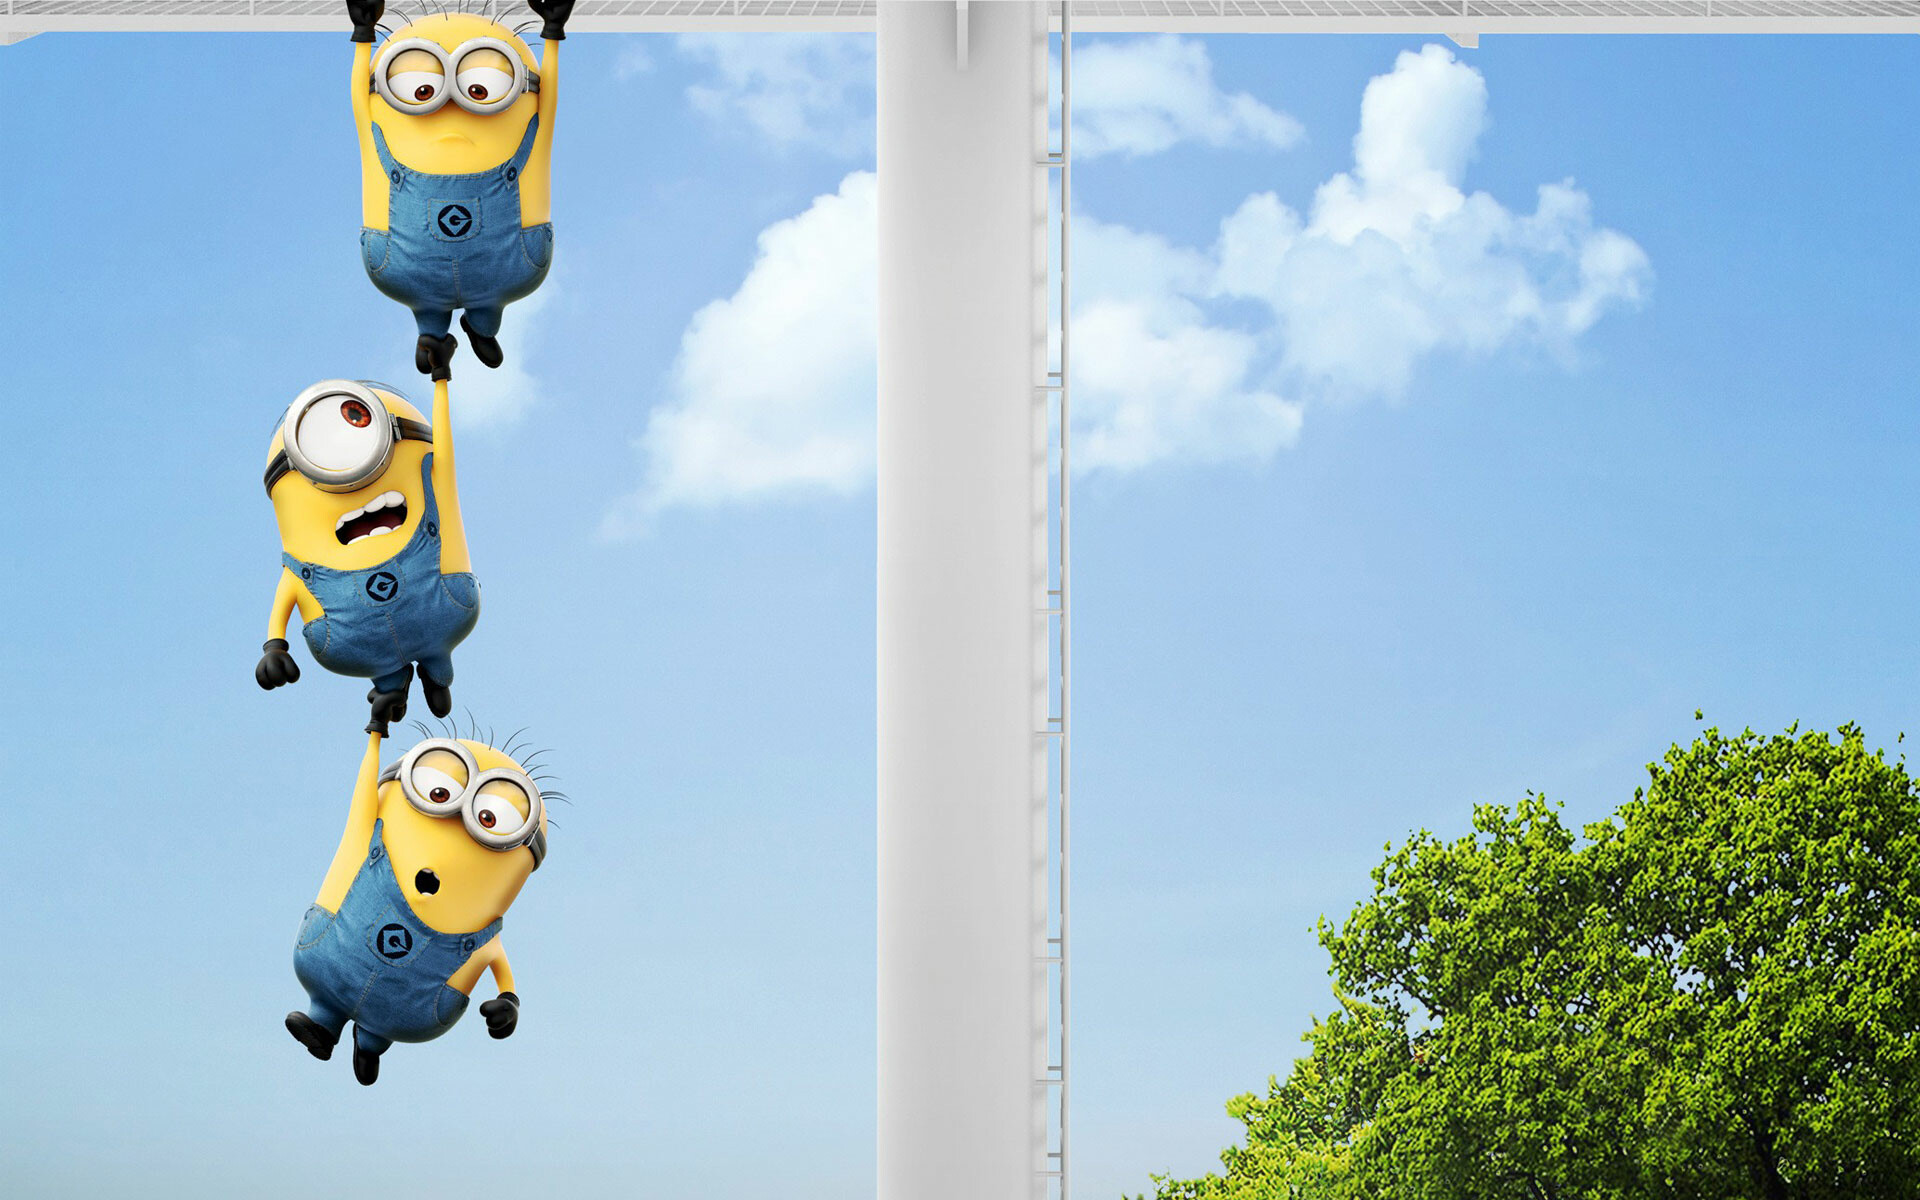 Despicable Me: Minions, The film was nominated for two awards at the 86th Academy Awards. 1920x1200 HD Wallpaper.